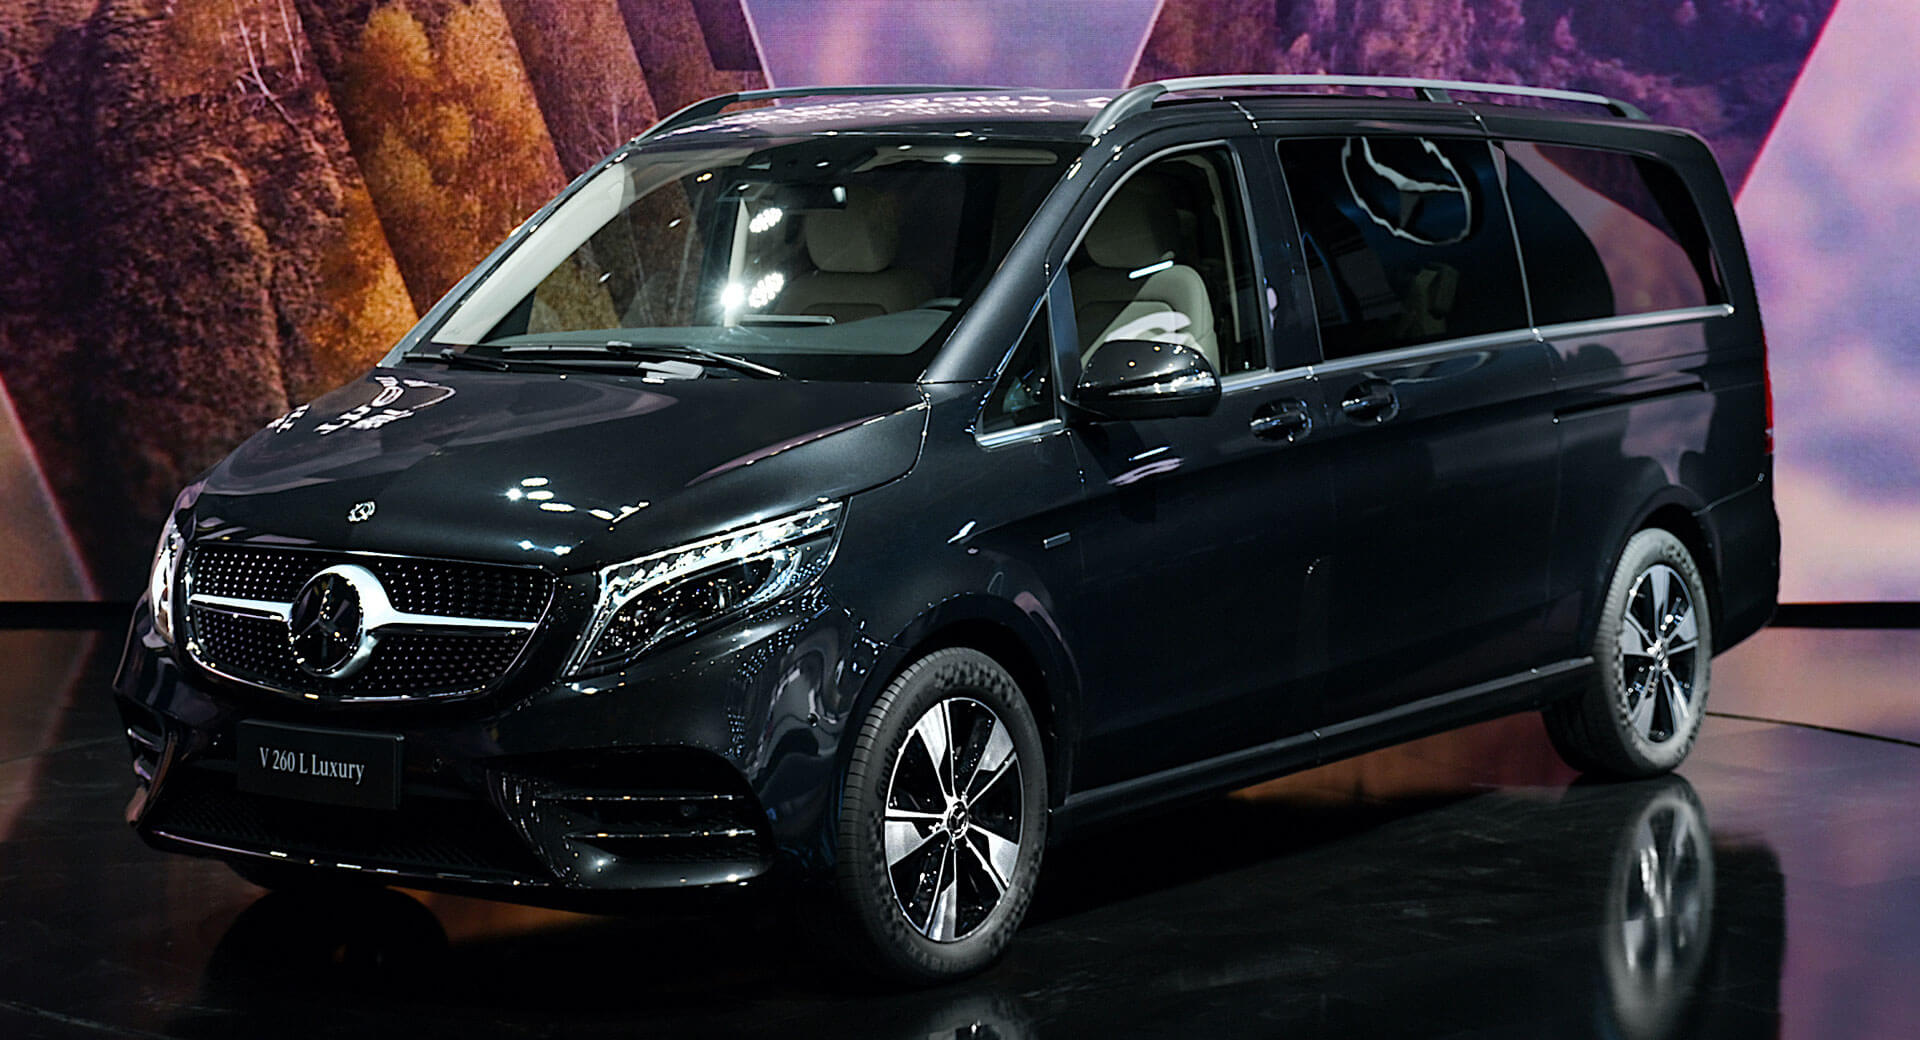 China, This Is Your 2021 Mercedes-Benz V-Class Luxury Minivan